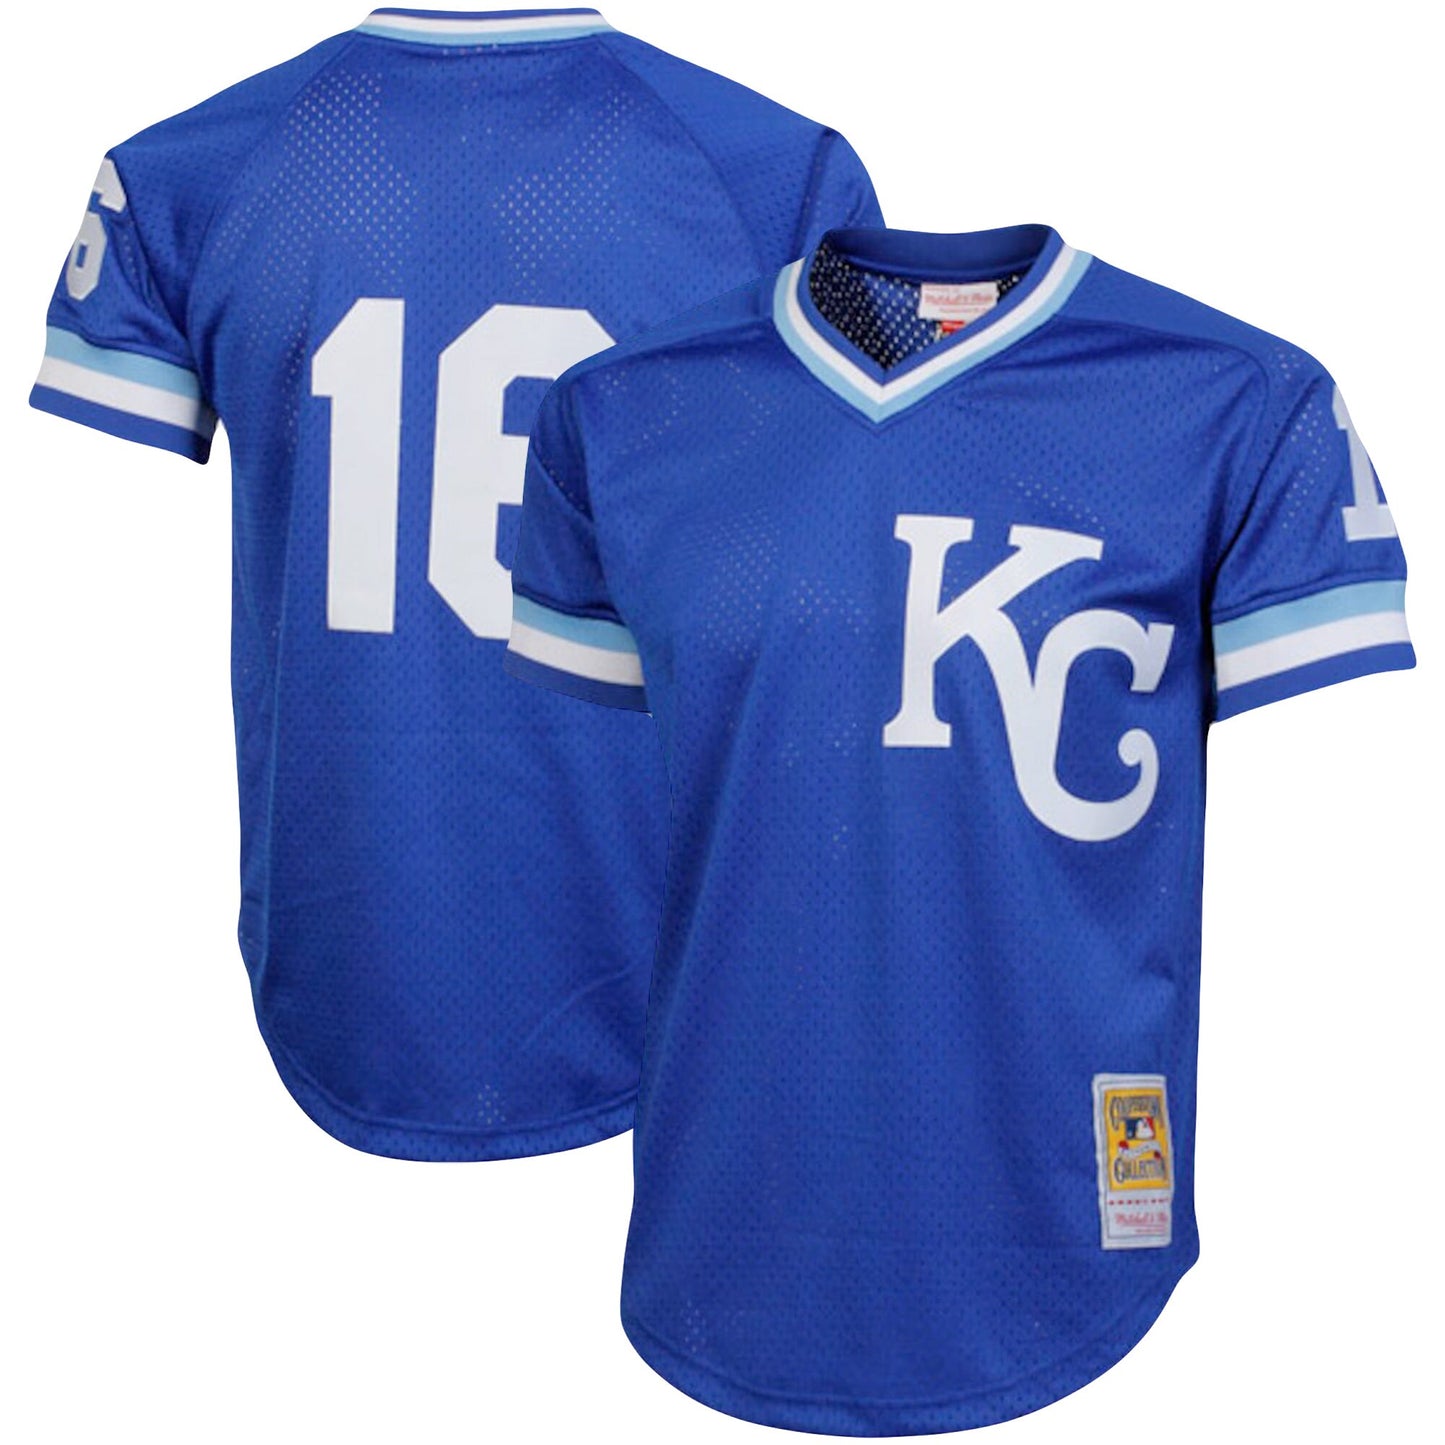 Bo Jackson Kansas City Royals Mitchell & Ness Cooperstown Collection Big & Tall Mesh Batting Practice Jersey - Royal